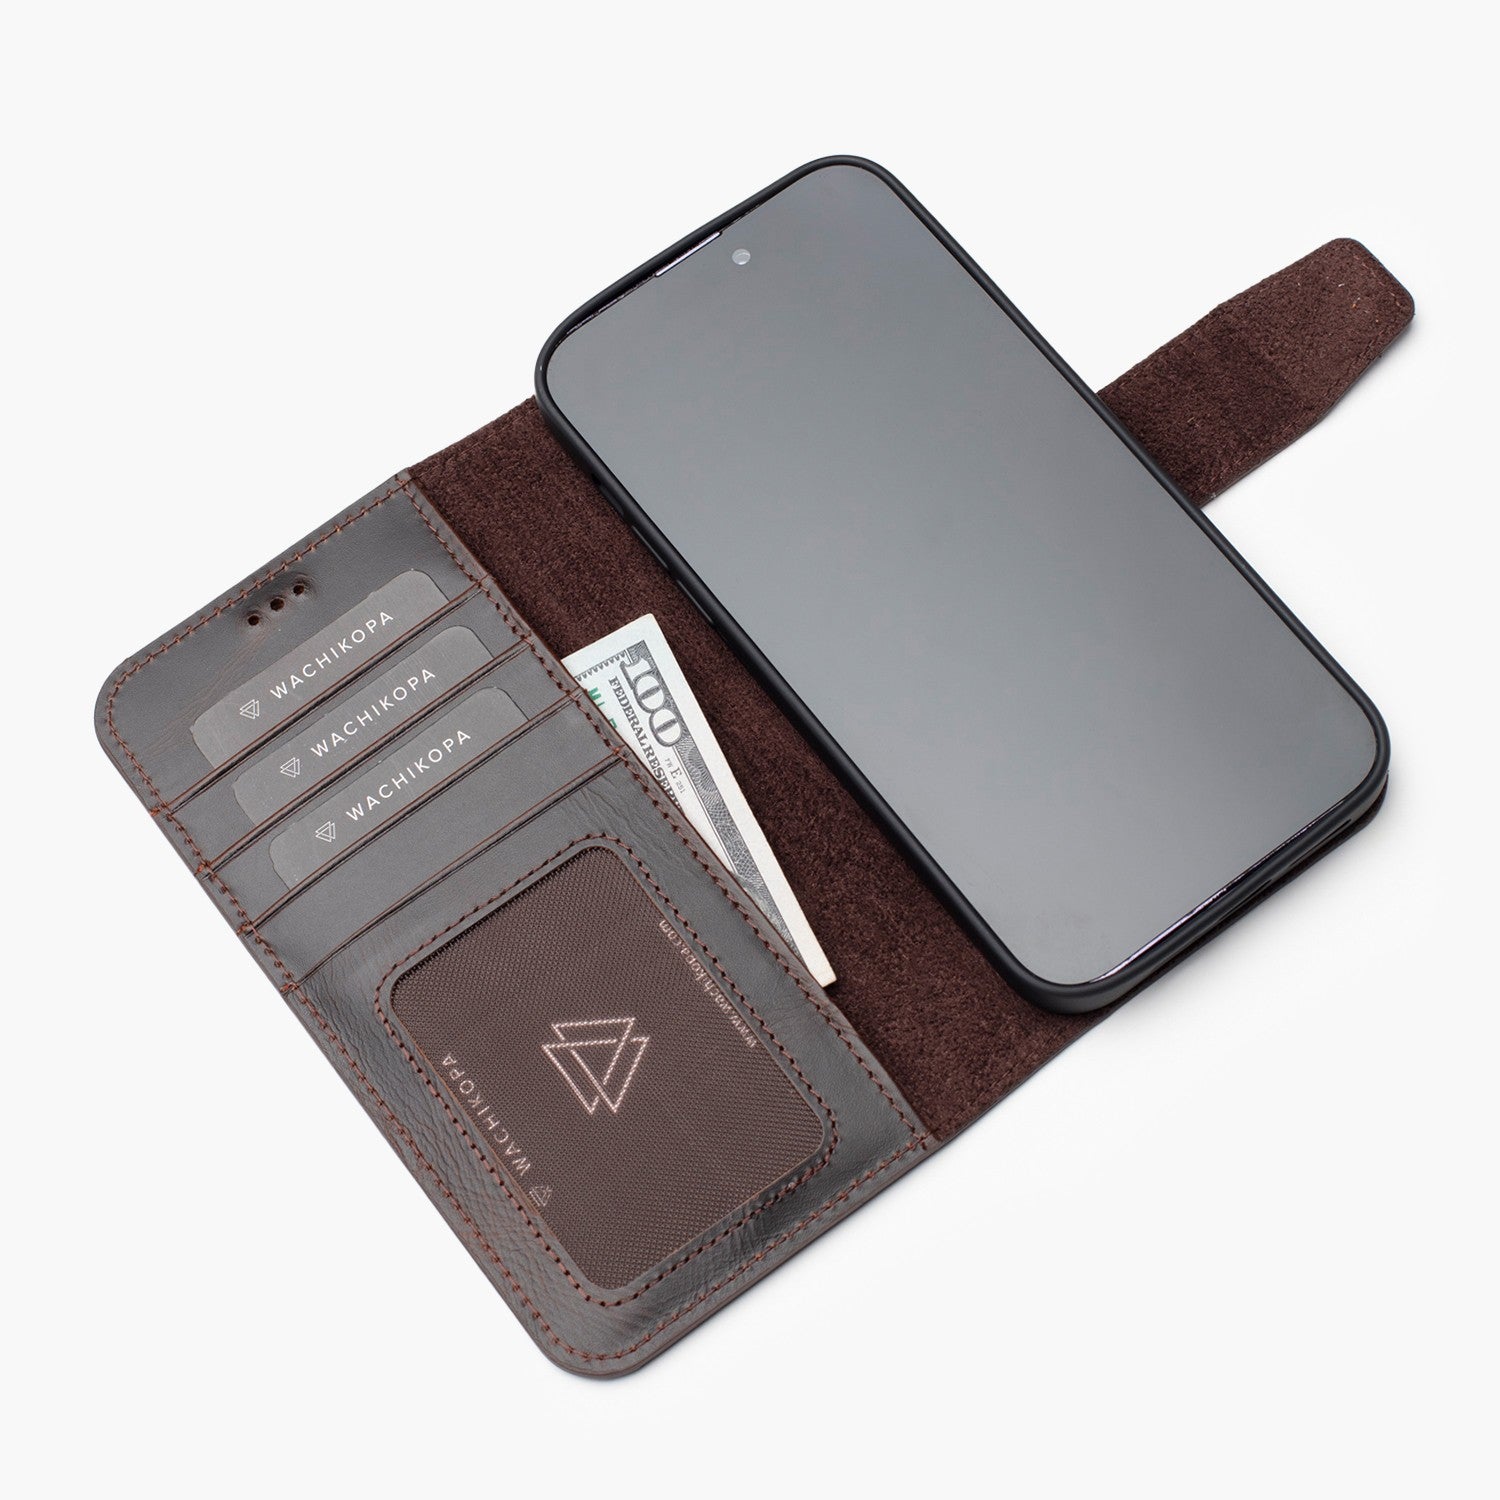 Wachikopa leather Classic iPhone Case for iPhone 12 Pro Dark Brown